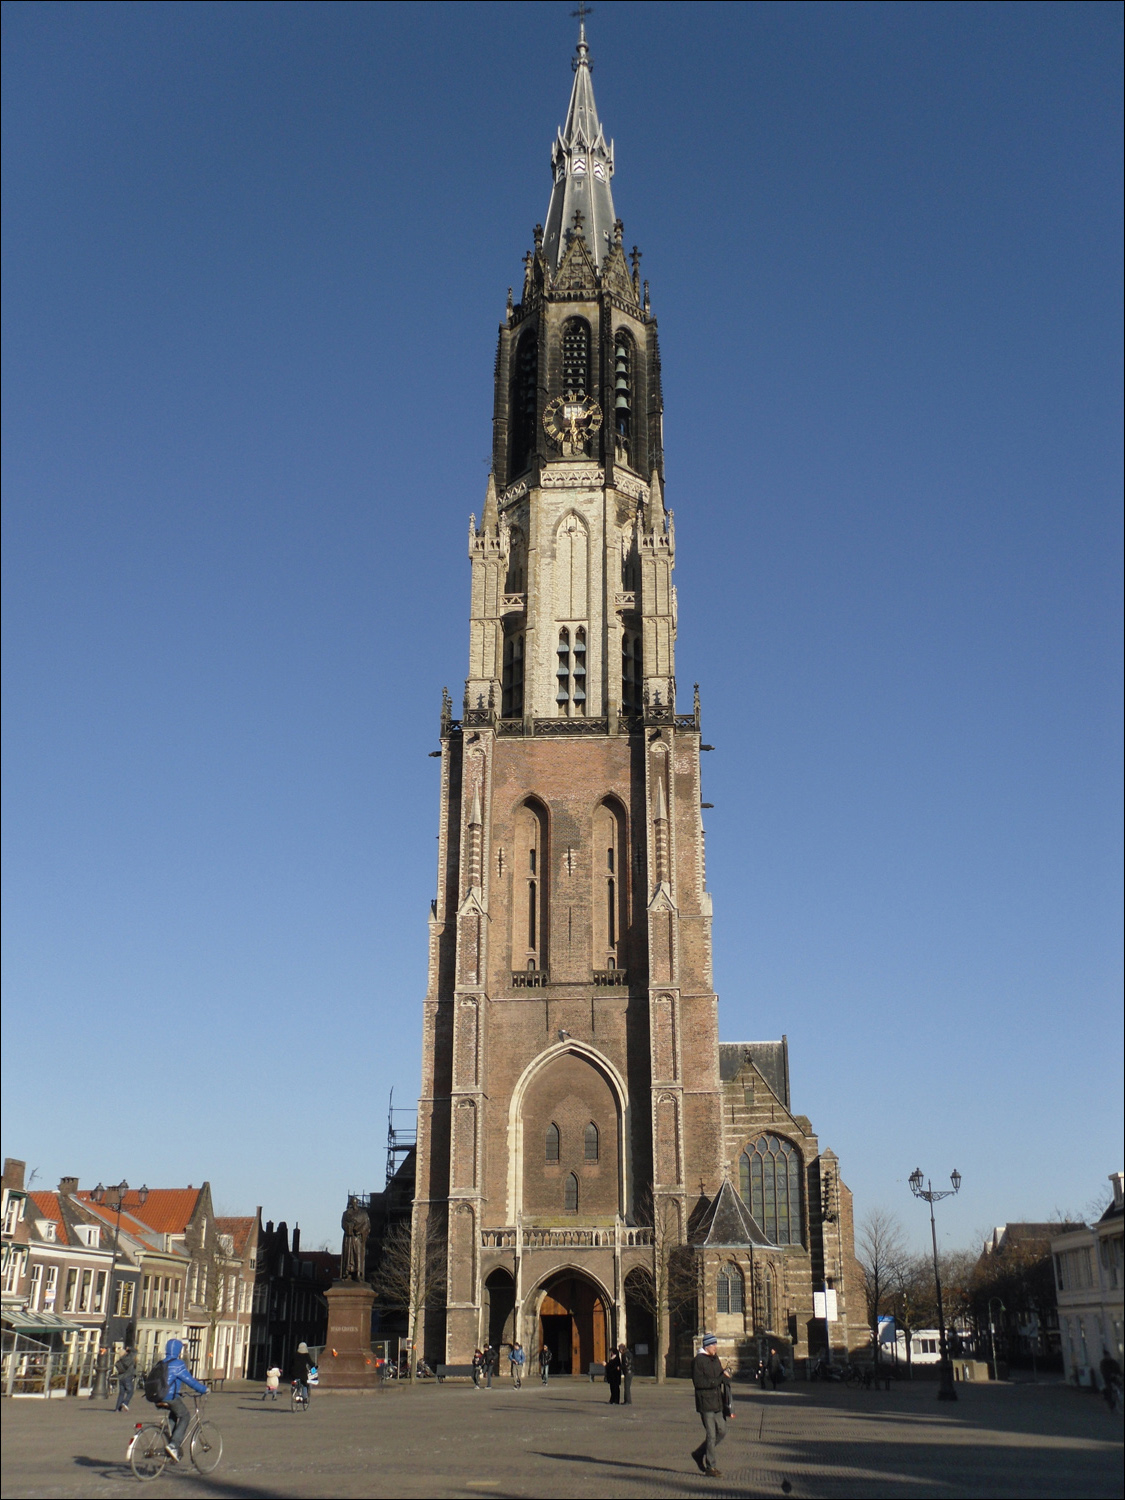 Delft-Nieuwe Kerk (New Church) across square from city hall